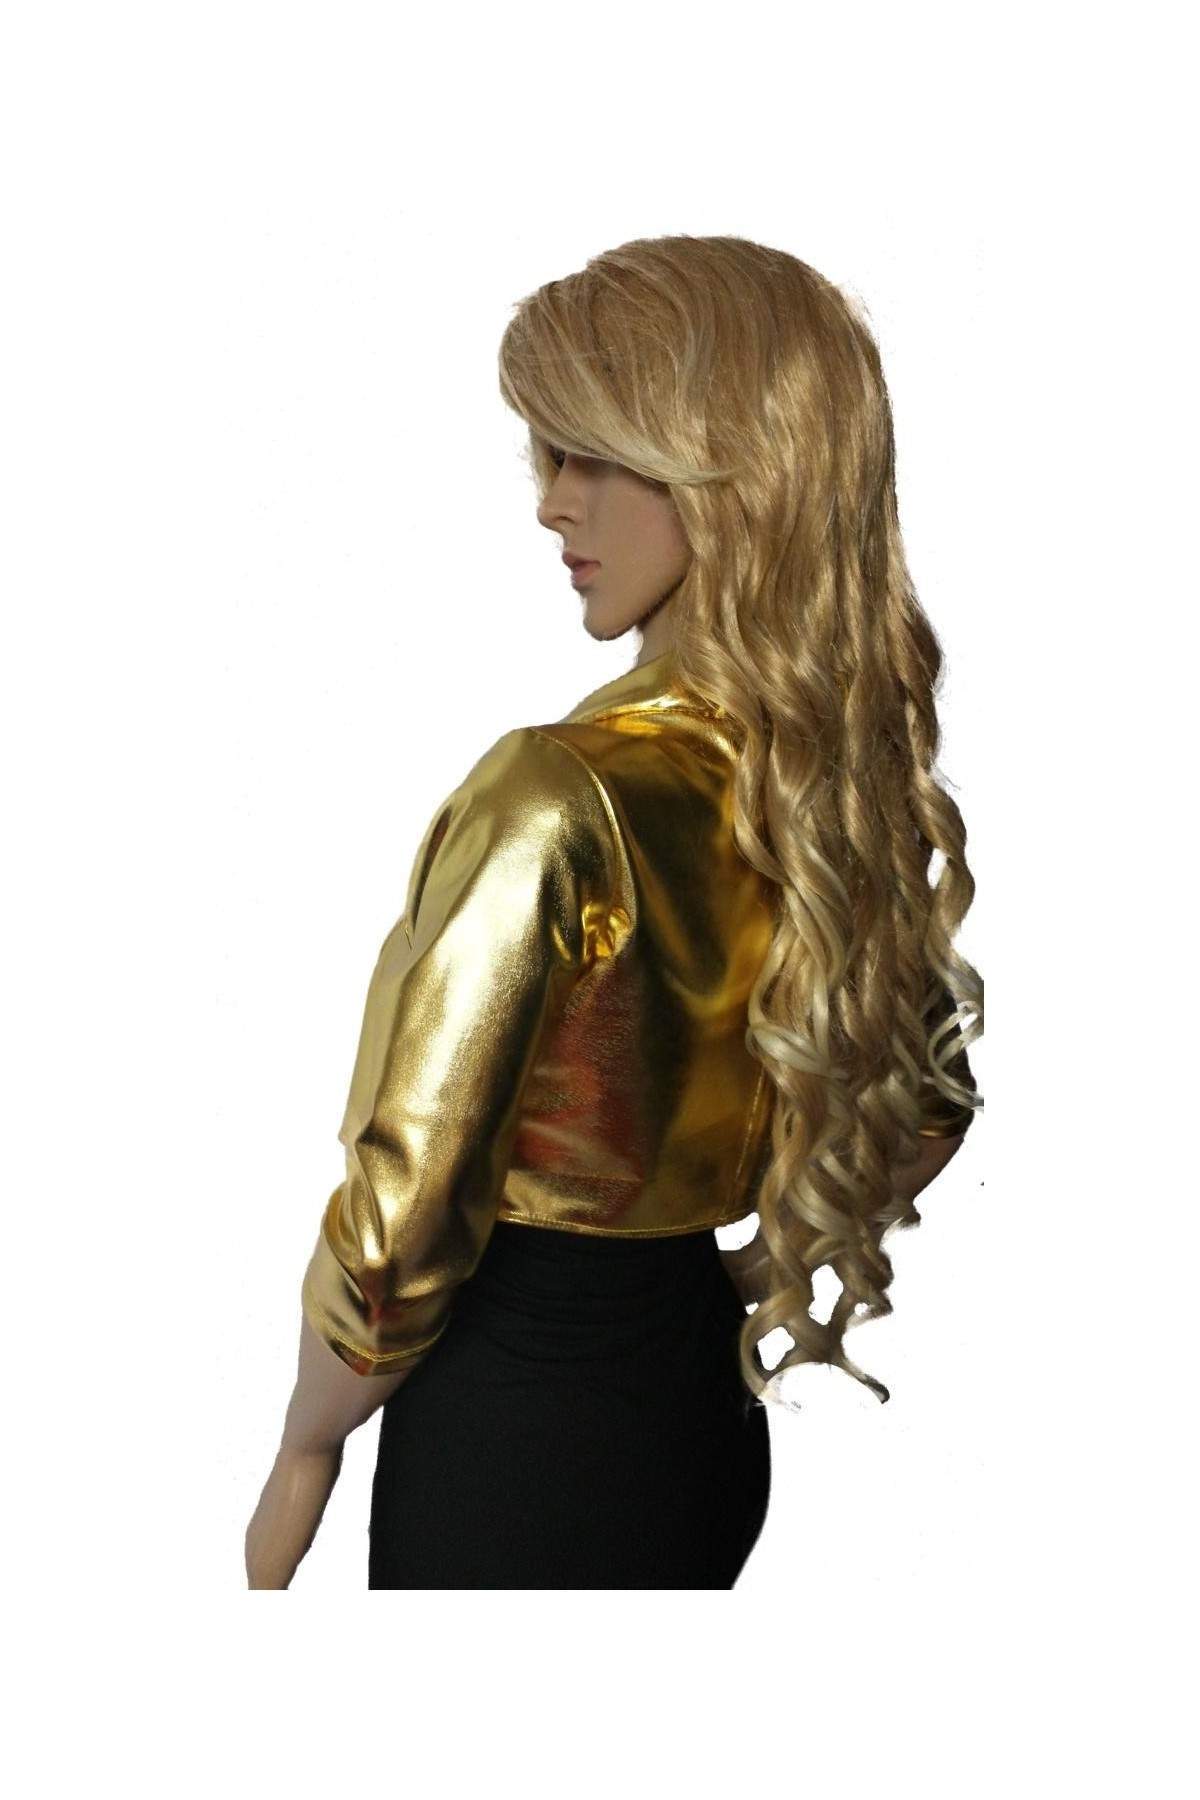 Save 15 percent on F.GIRTH short jacket gold leather look - 